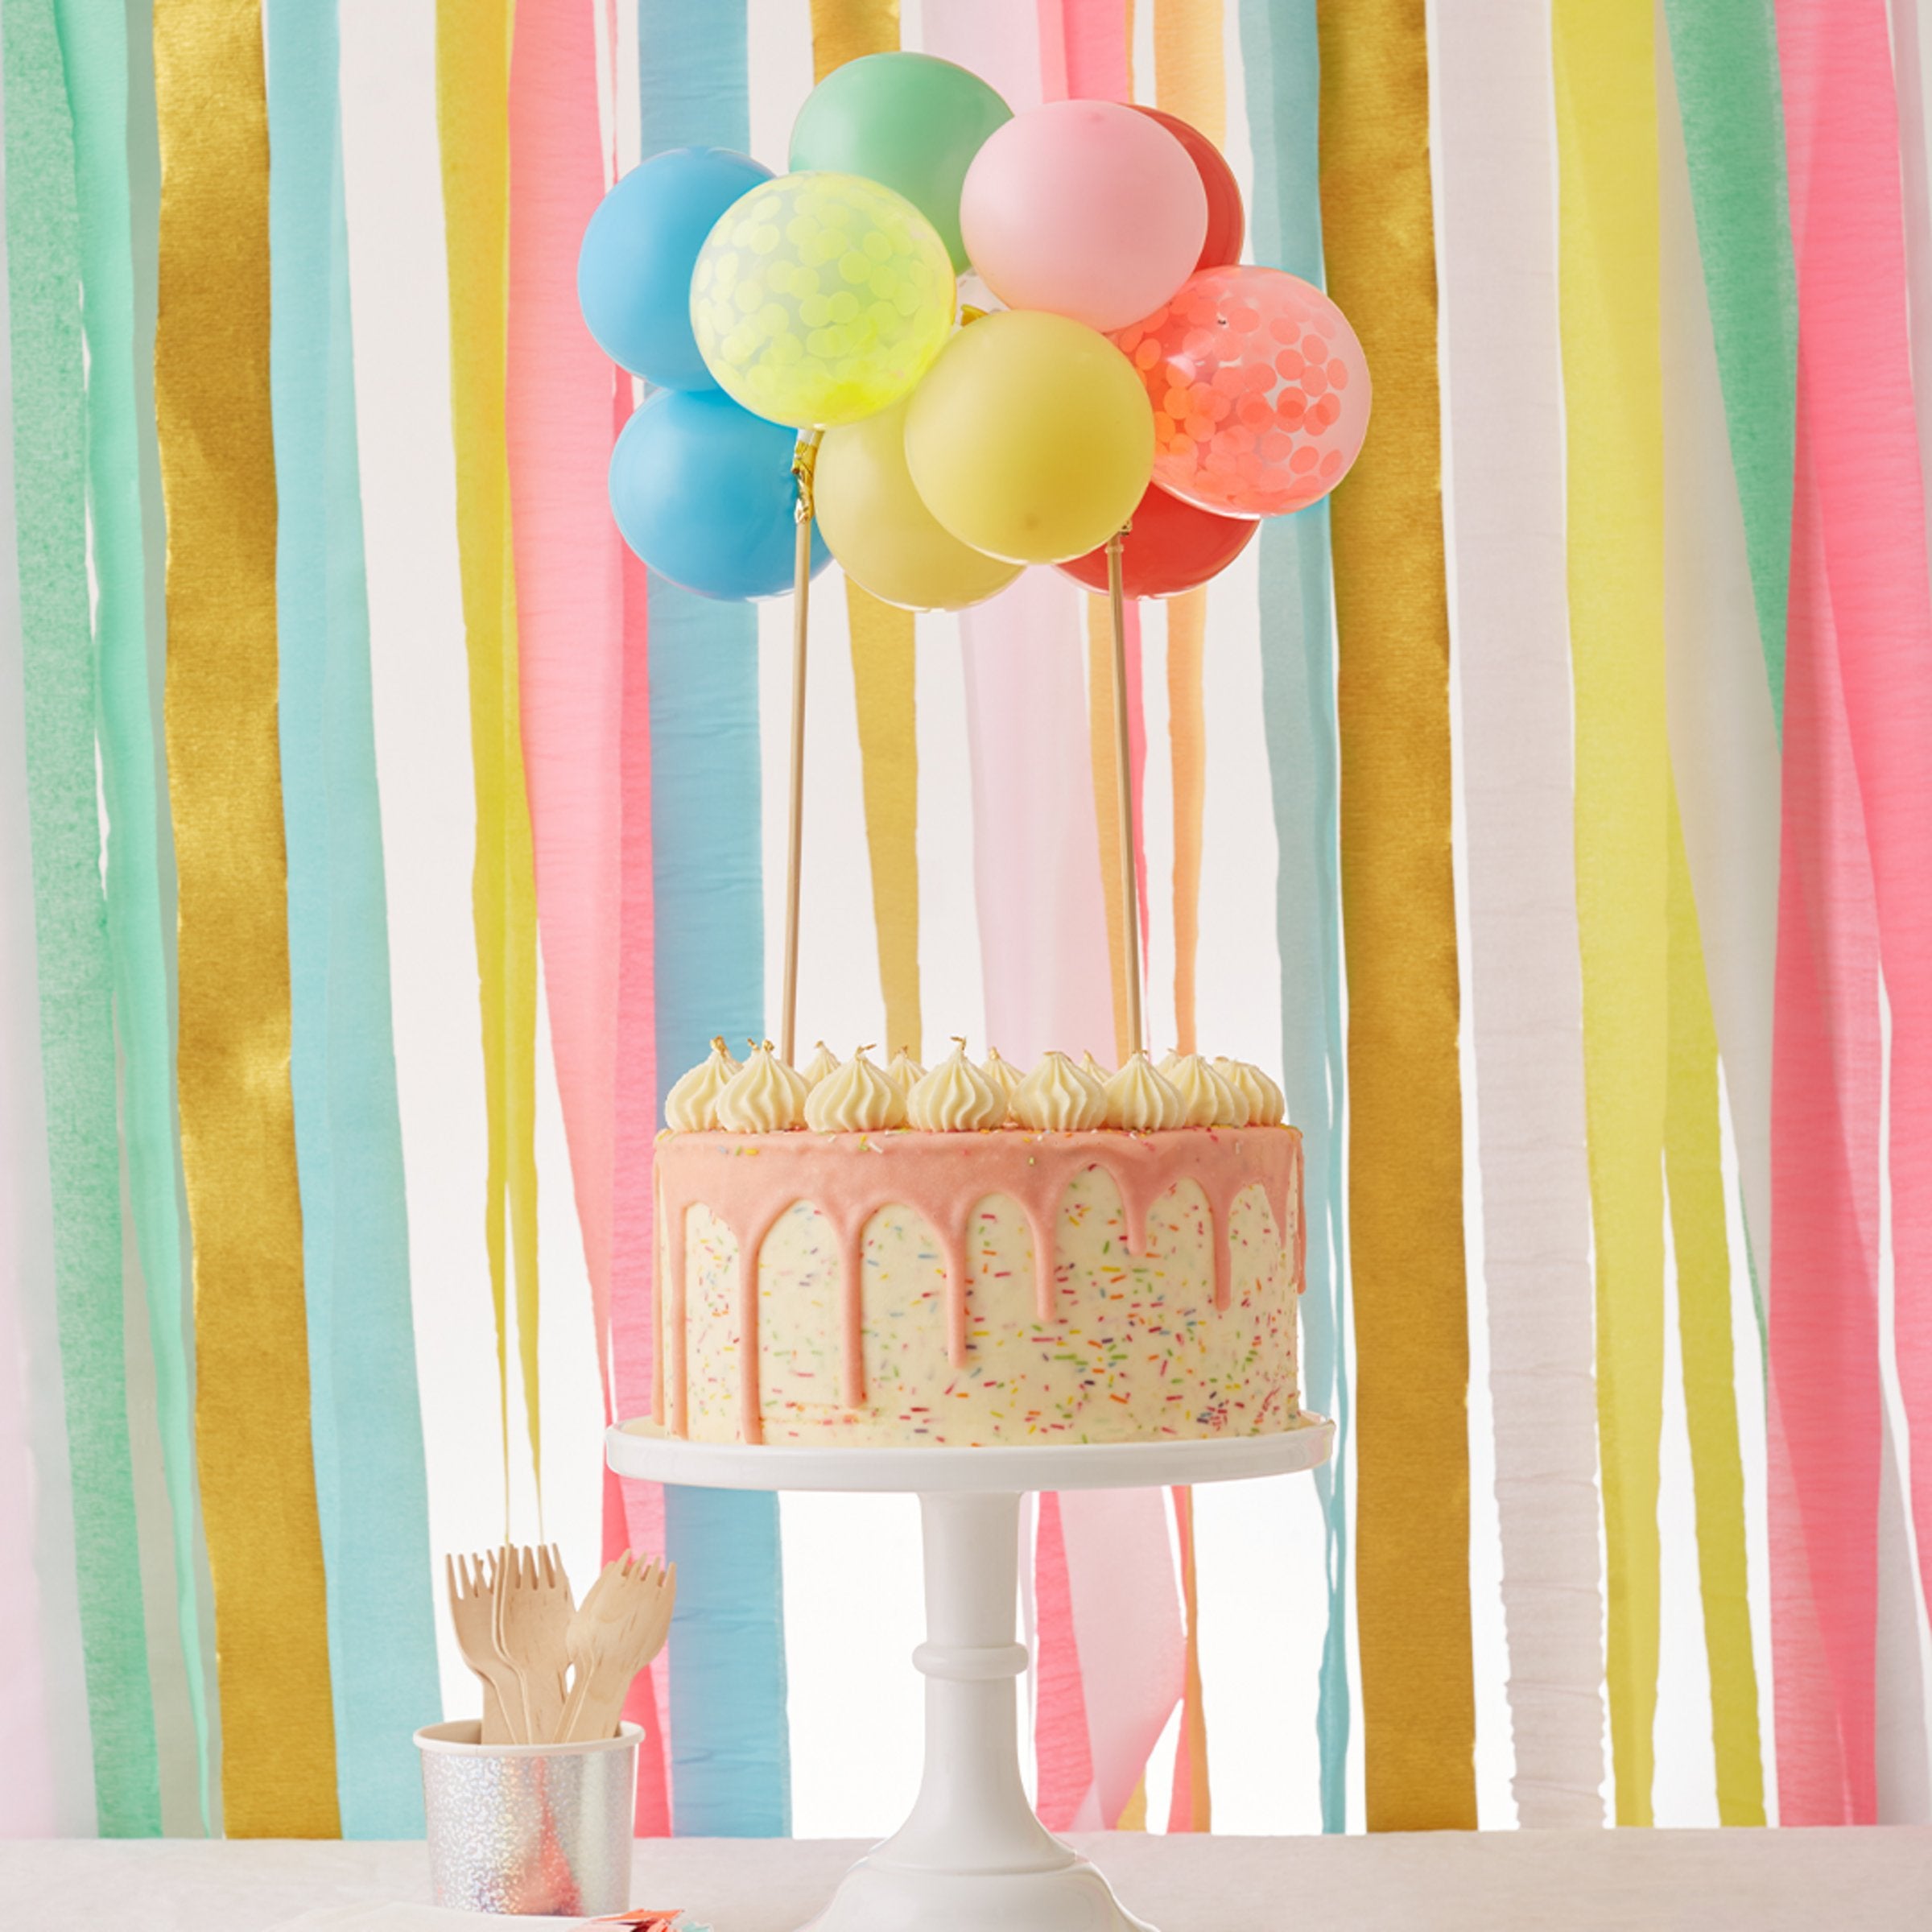 Balloon Cake | Truffles Bakers & Confectioners LTD